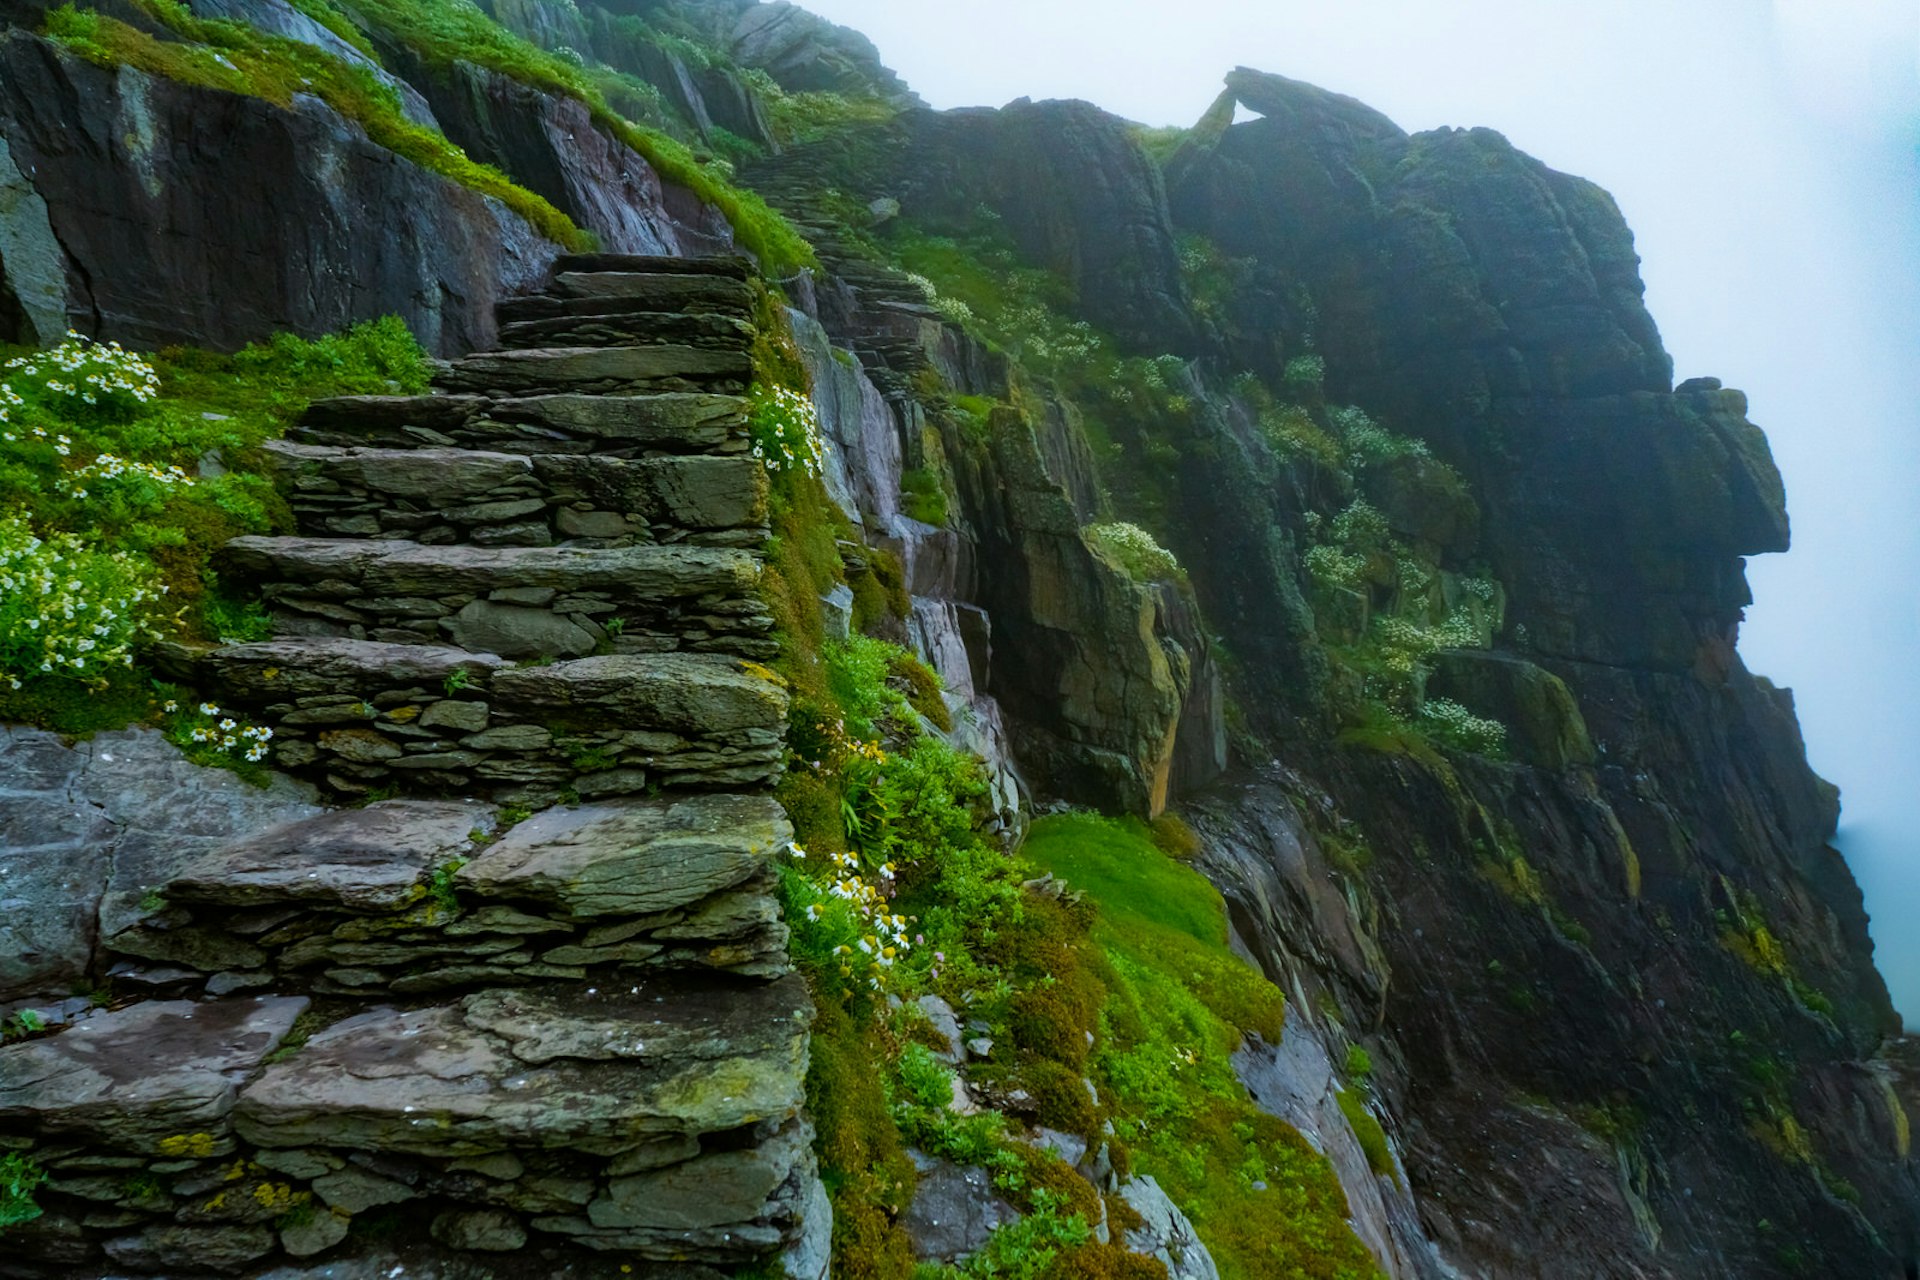 Stone stairs cut into the side of the mountain, covered in a moss on a misty day